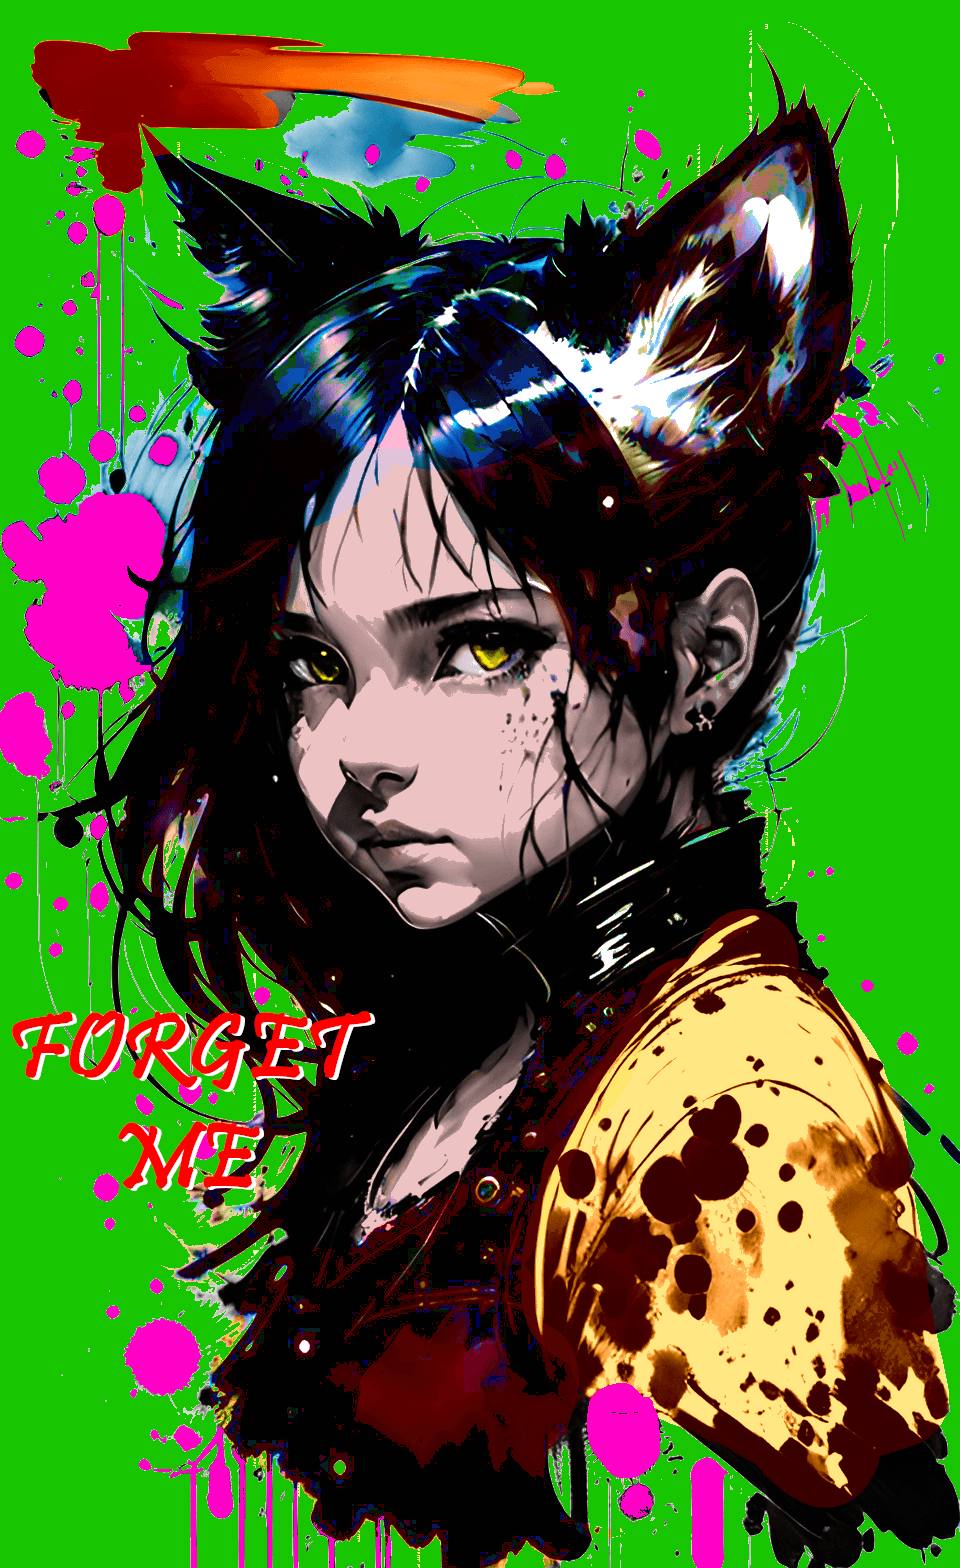 Forget Me Poster Beauty